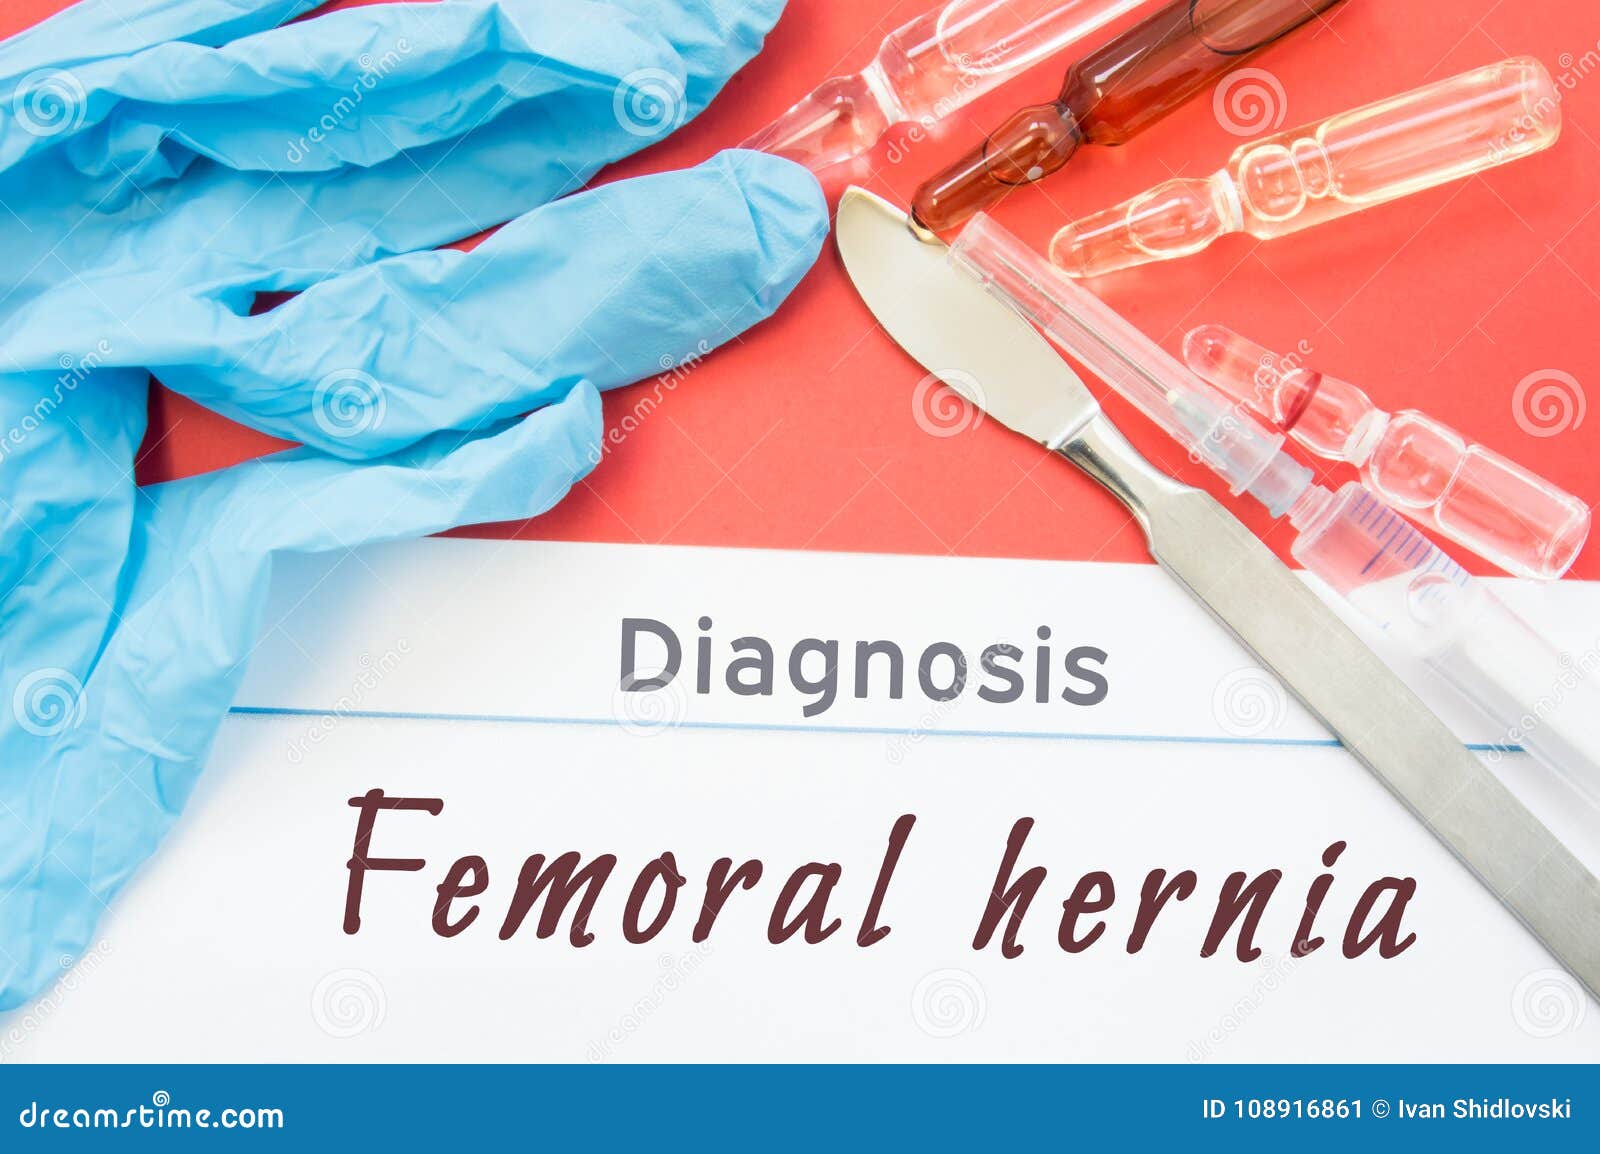 diagnosis femoral hernia. blue gloves, surgical scalpel, syringe and ampoule with medicine lie next to inscription femoral hernia.